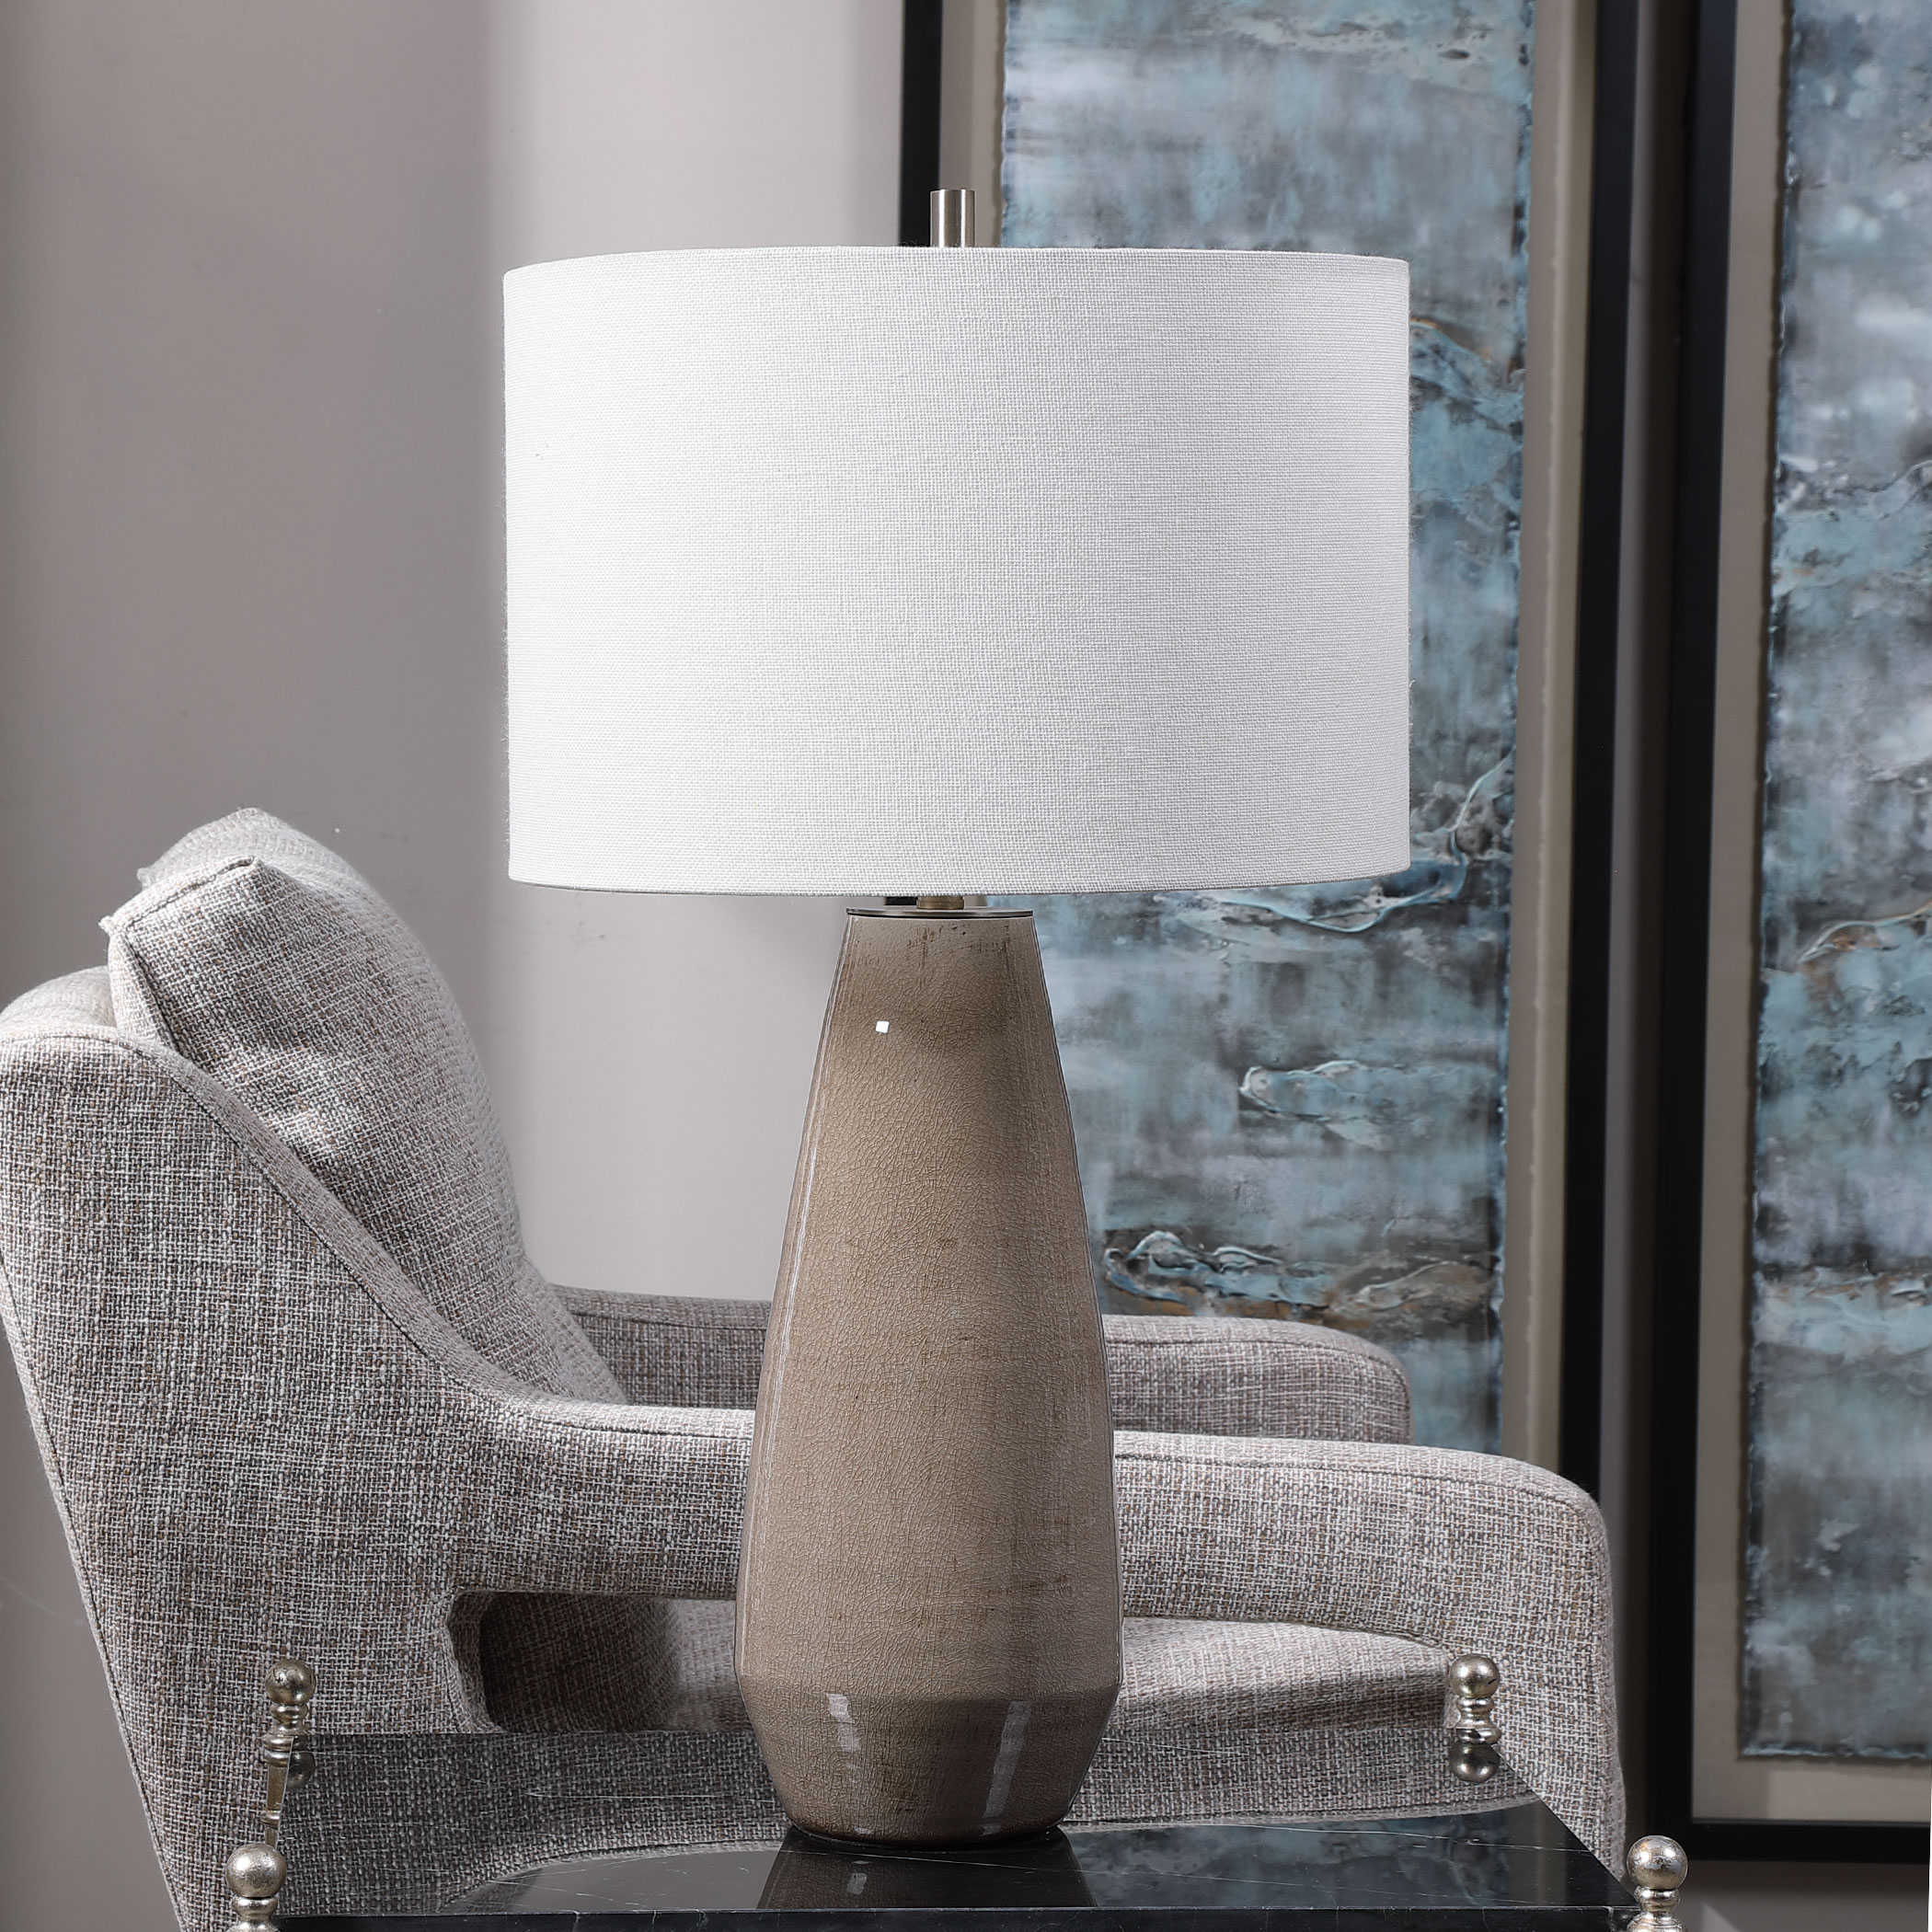 Uttermost Volterra Taupe-Gray Table Lamp Taupe-Gray Table Lamp Uttermost   